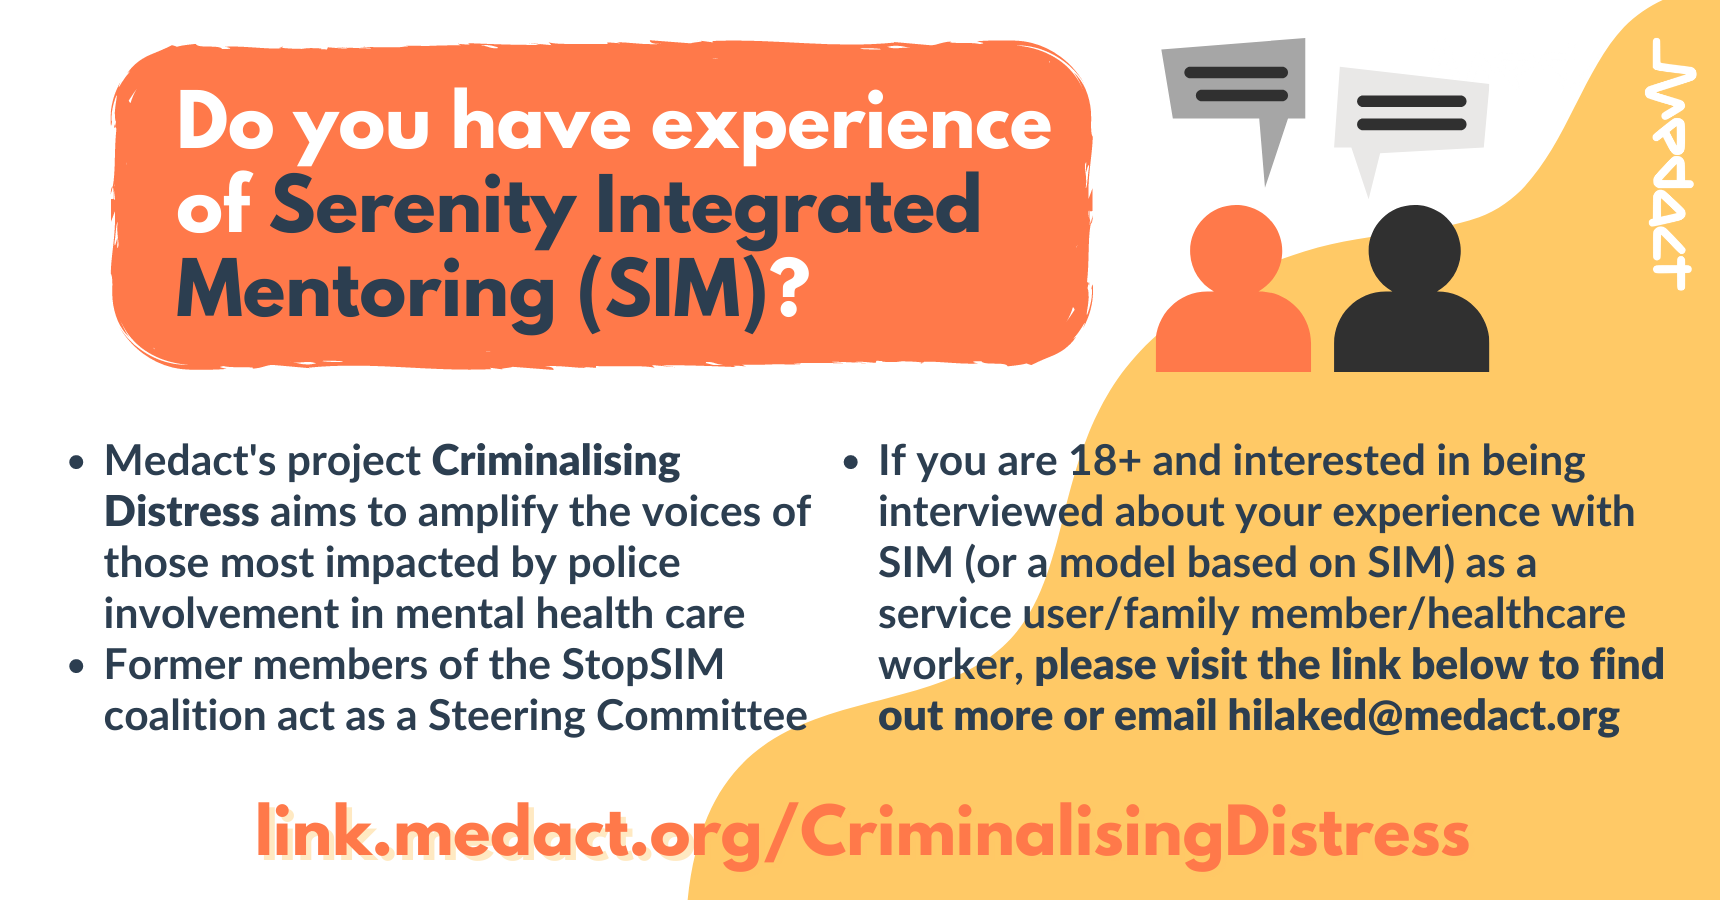 Do you have experience of Serenity Integrated Mentoring (SIM)? Medact's project Criminalising Distress aims to amplify the voices of those most impacted by police involvement in mental health care. Former members of the StopSIM coalition act as a Steering Committee. If you are 18+ and interested in being interviewed about your experience with SIM (or a model based on SIM) as a service user/family member/healthcare worker, please visit the link below to find out more or email hilaked@medact.org